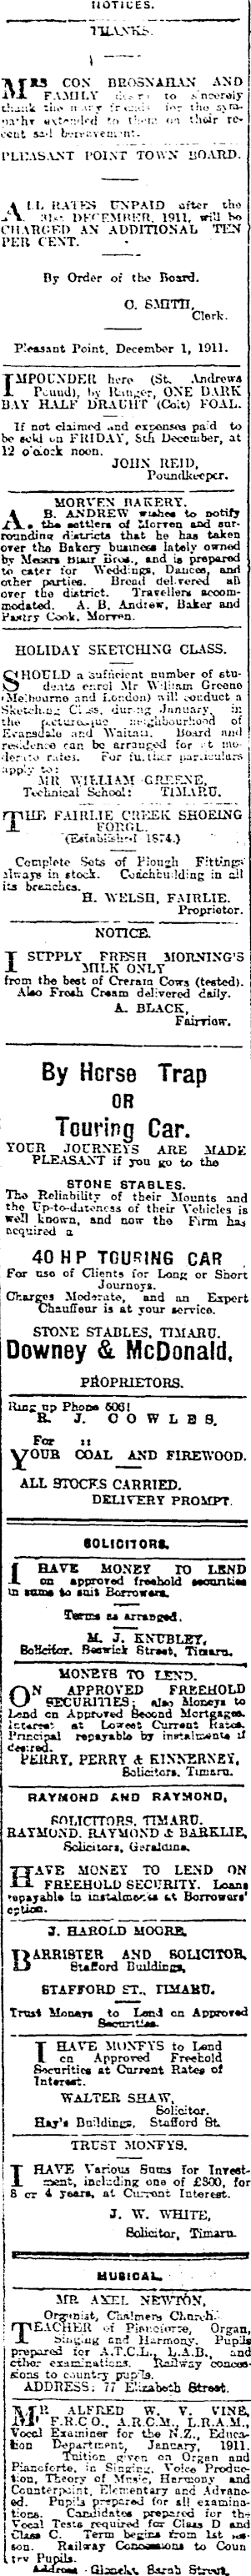 Papers Past Newspapers Timaru Herald 1 December 1911 Page 2 Advertisements Column 3